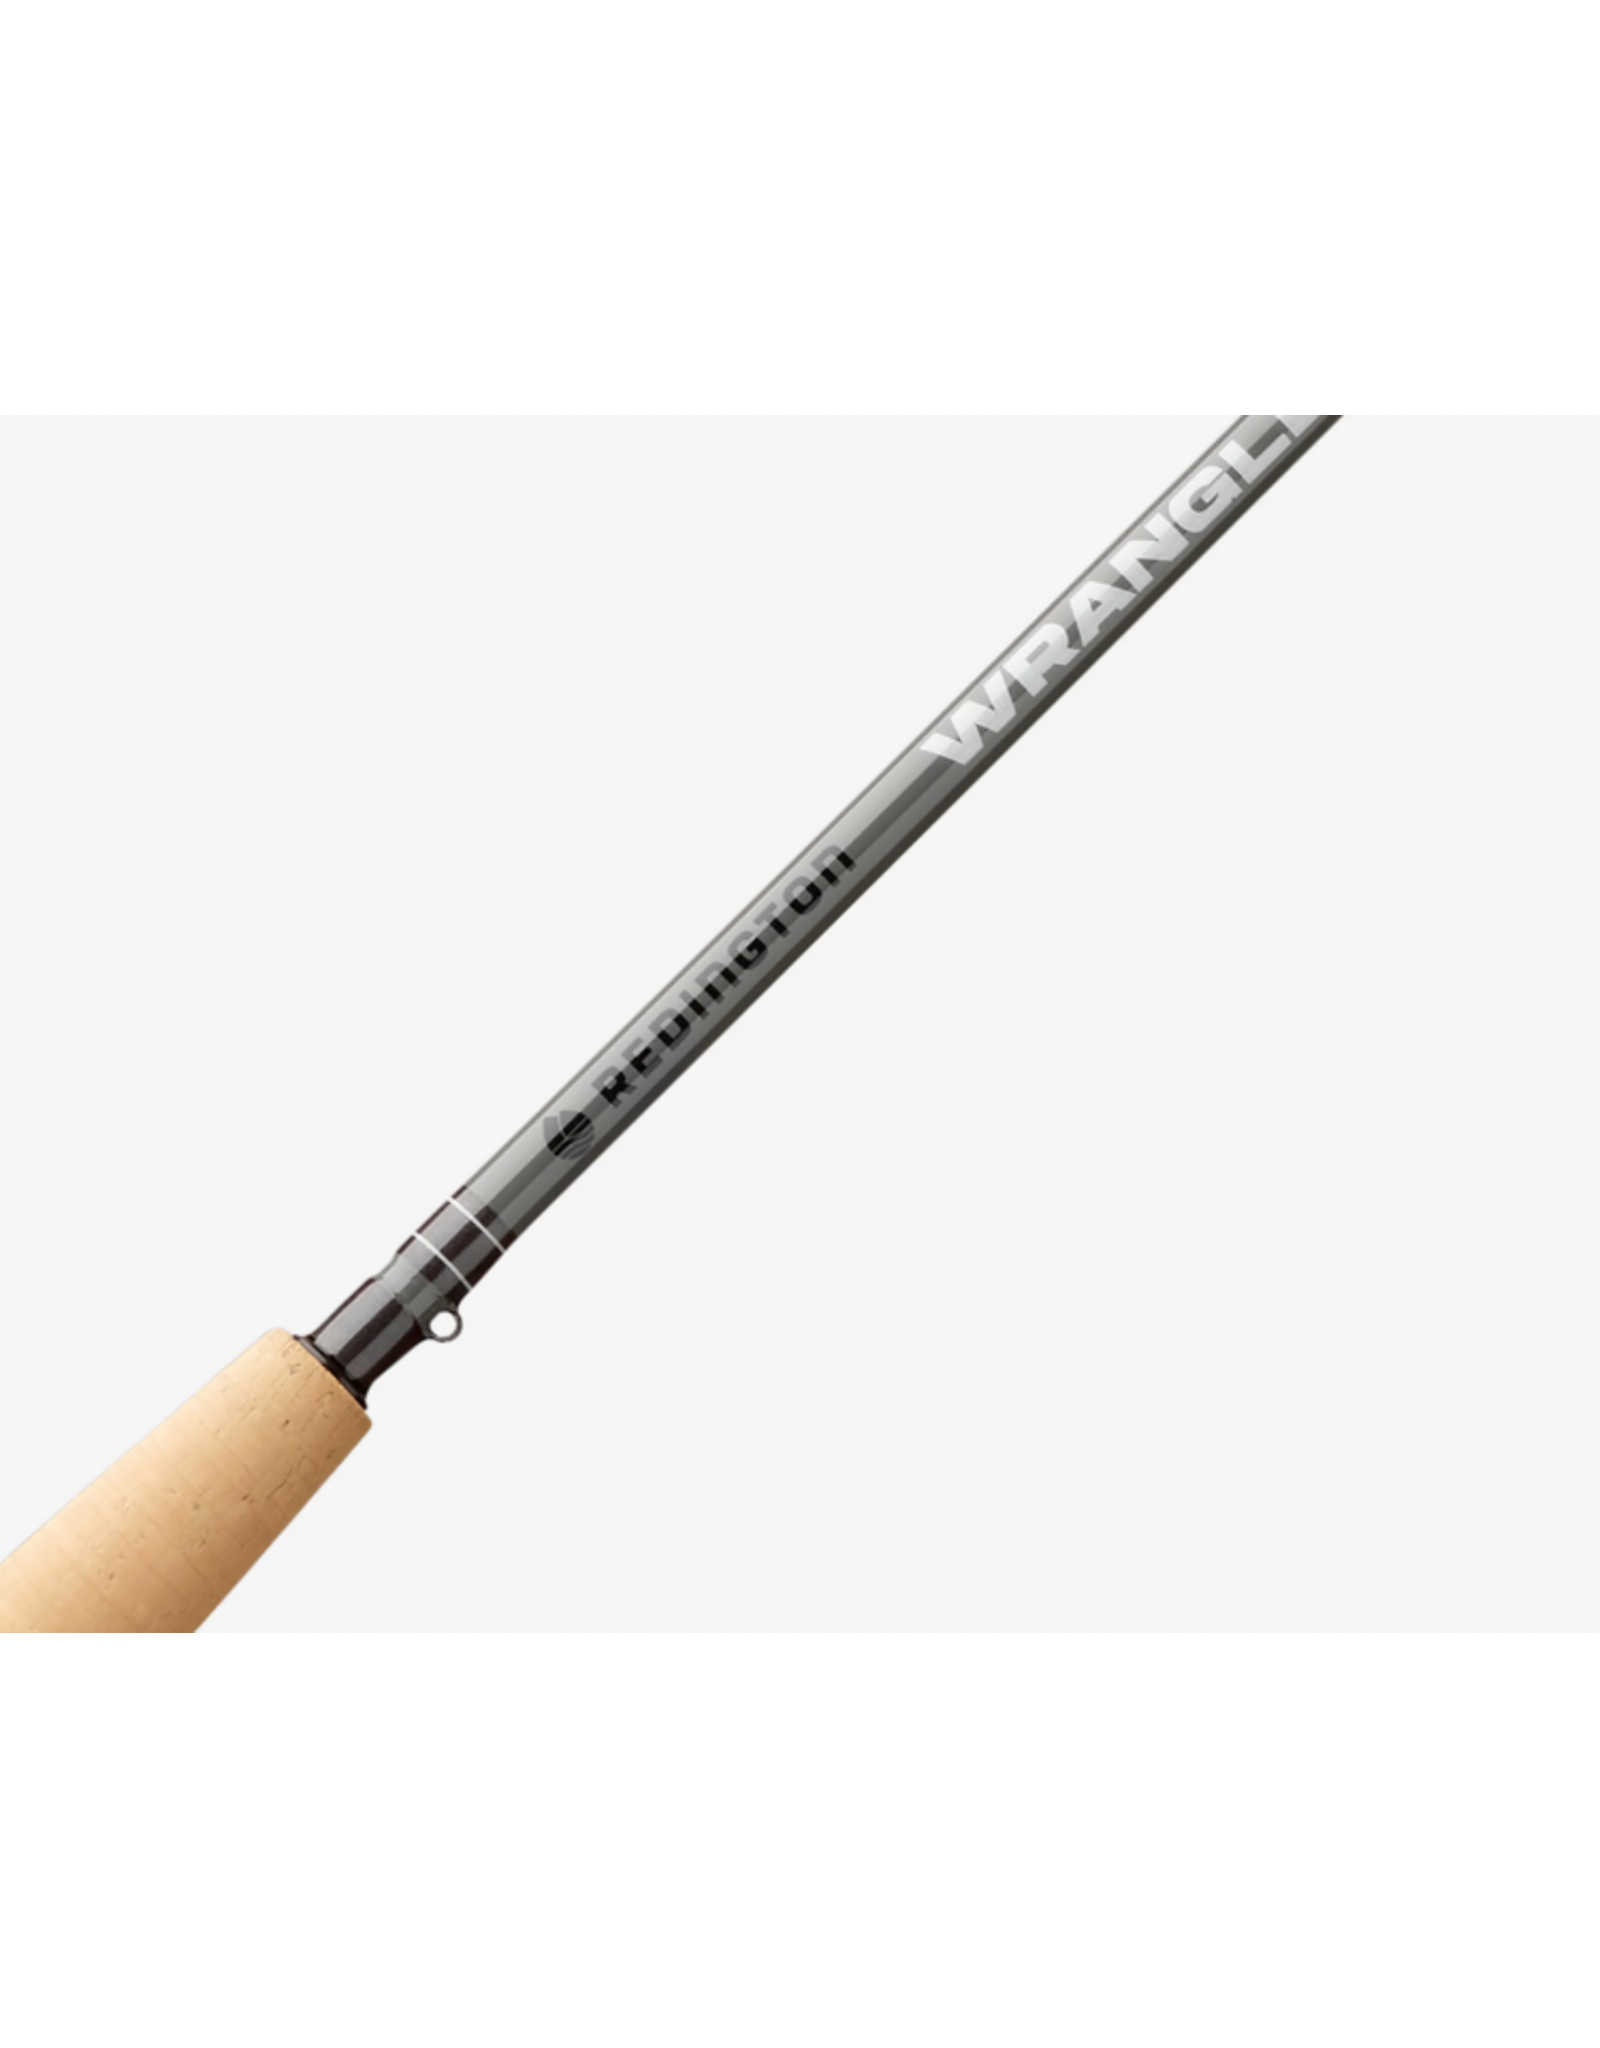 NEW Orvis Clearwater Fly Rod 9' 6wt (4pc) - Royal Gorge Anglers